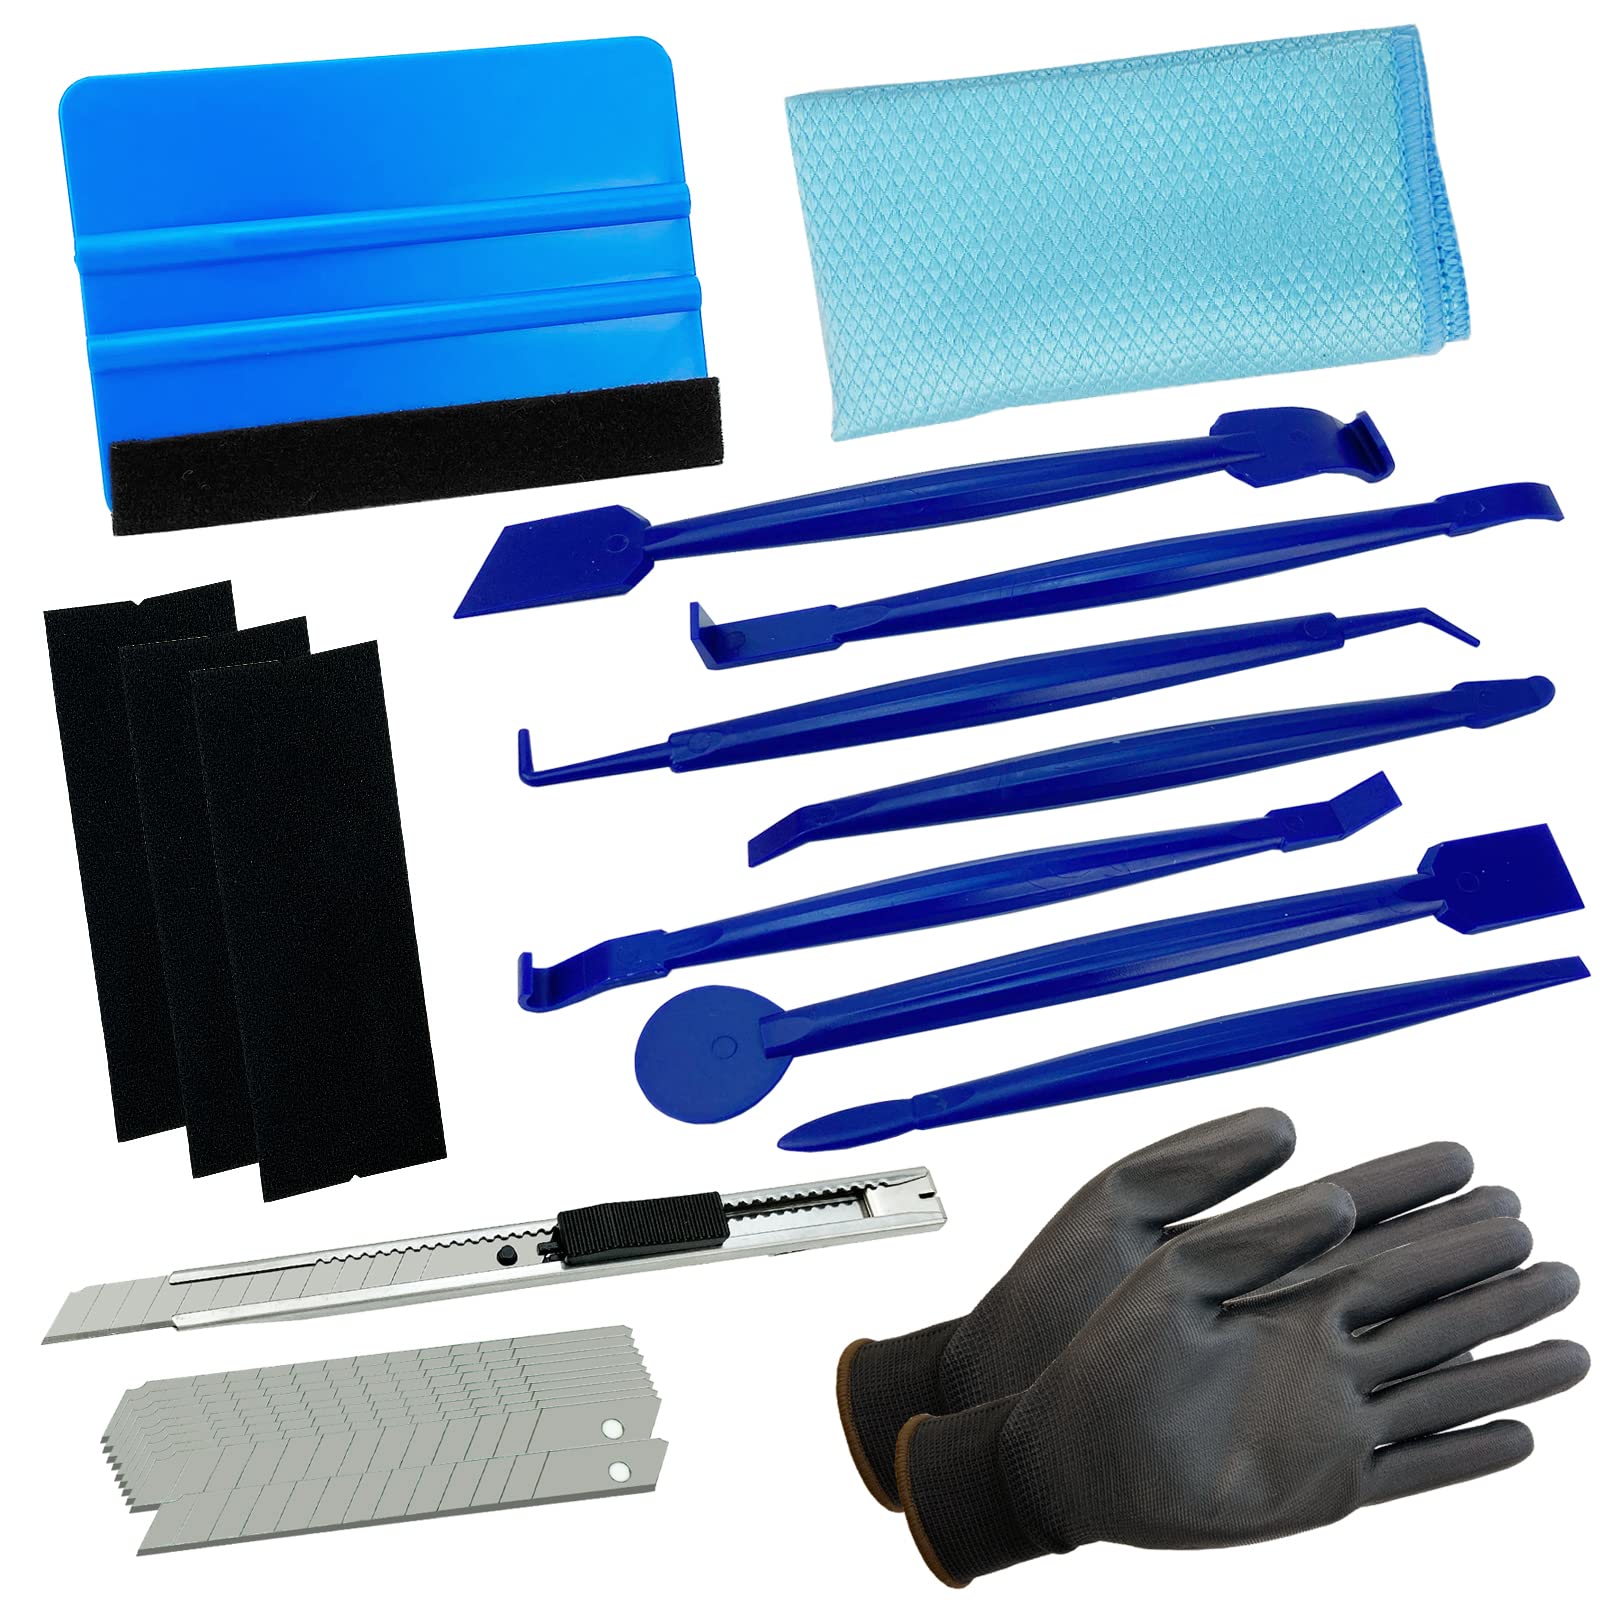 Spanno Tools Spanno Vinyl Wrap Tool Kit Window Tint Kits for Window Film Installation, Include 7PcS Pro Tinting Stick Squeegee, Felt Squeegee